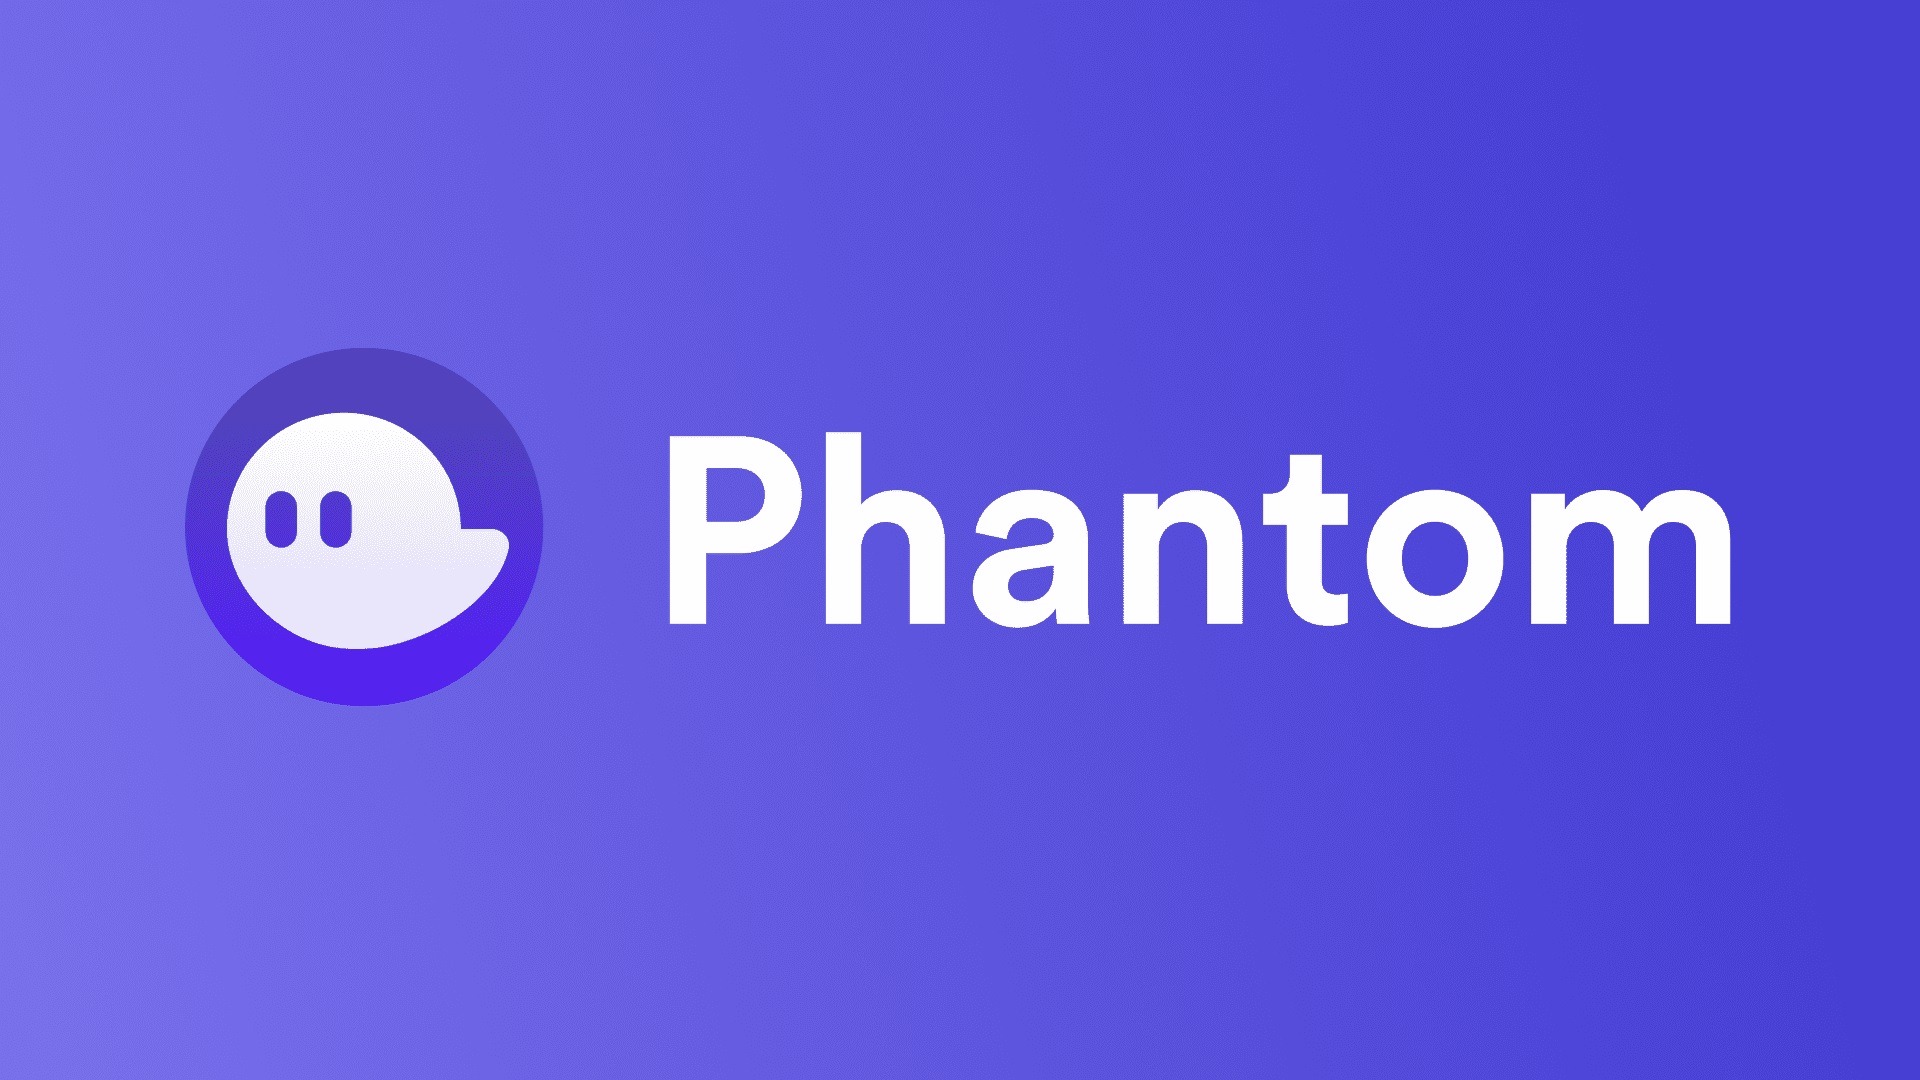 Phantom Crypto Wallet Sees Explosive Growth Due To Solana-Based DeFi And Airdrops